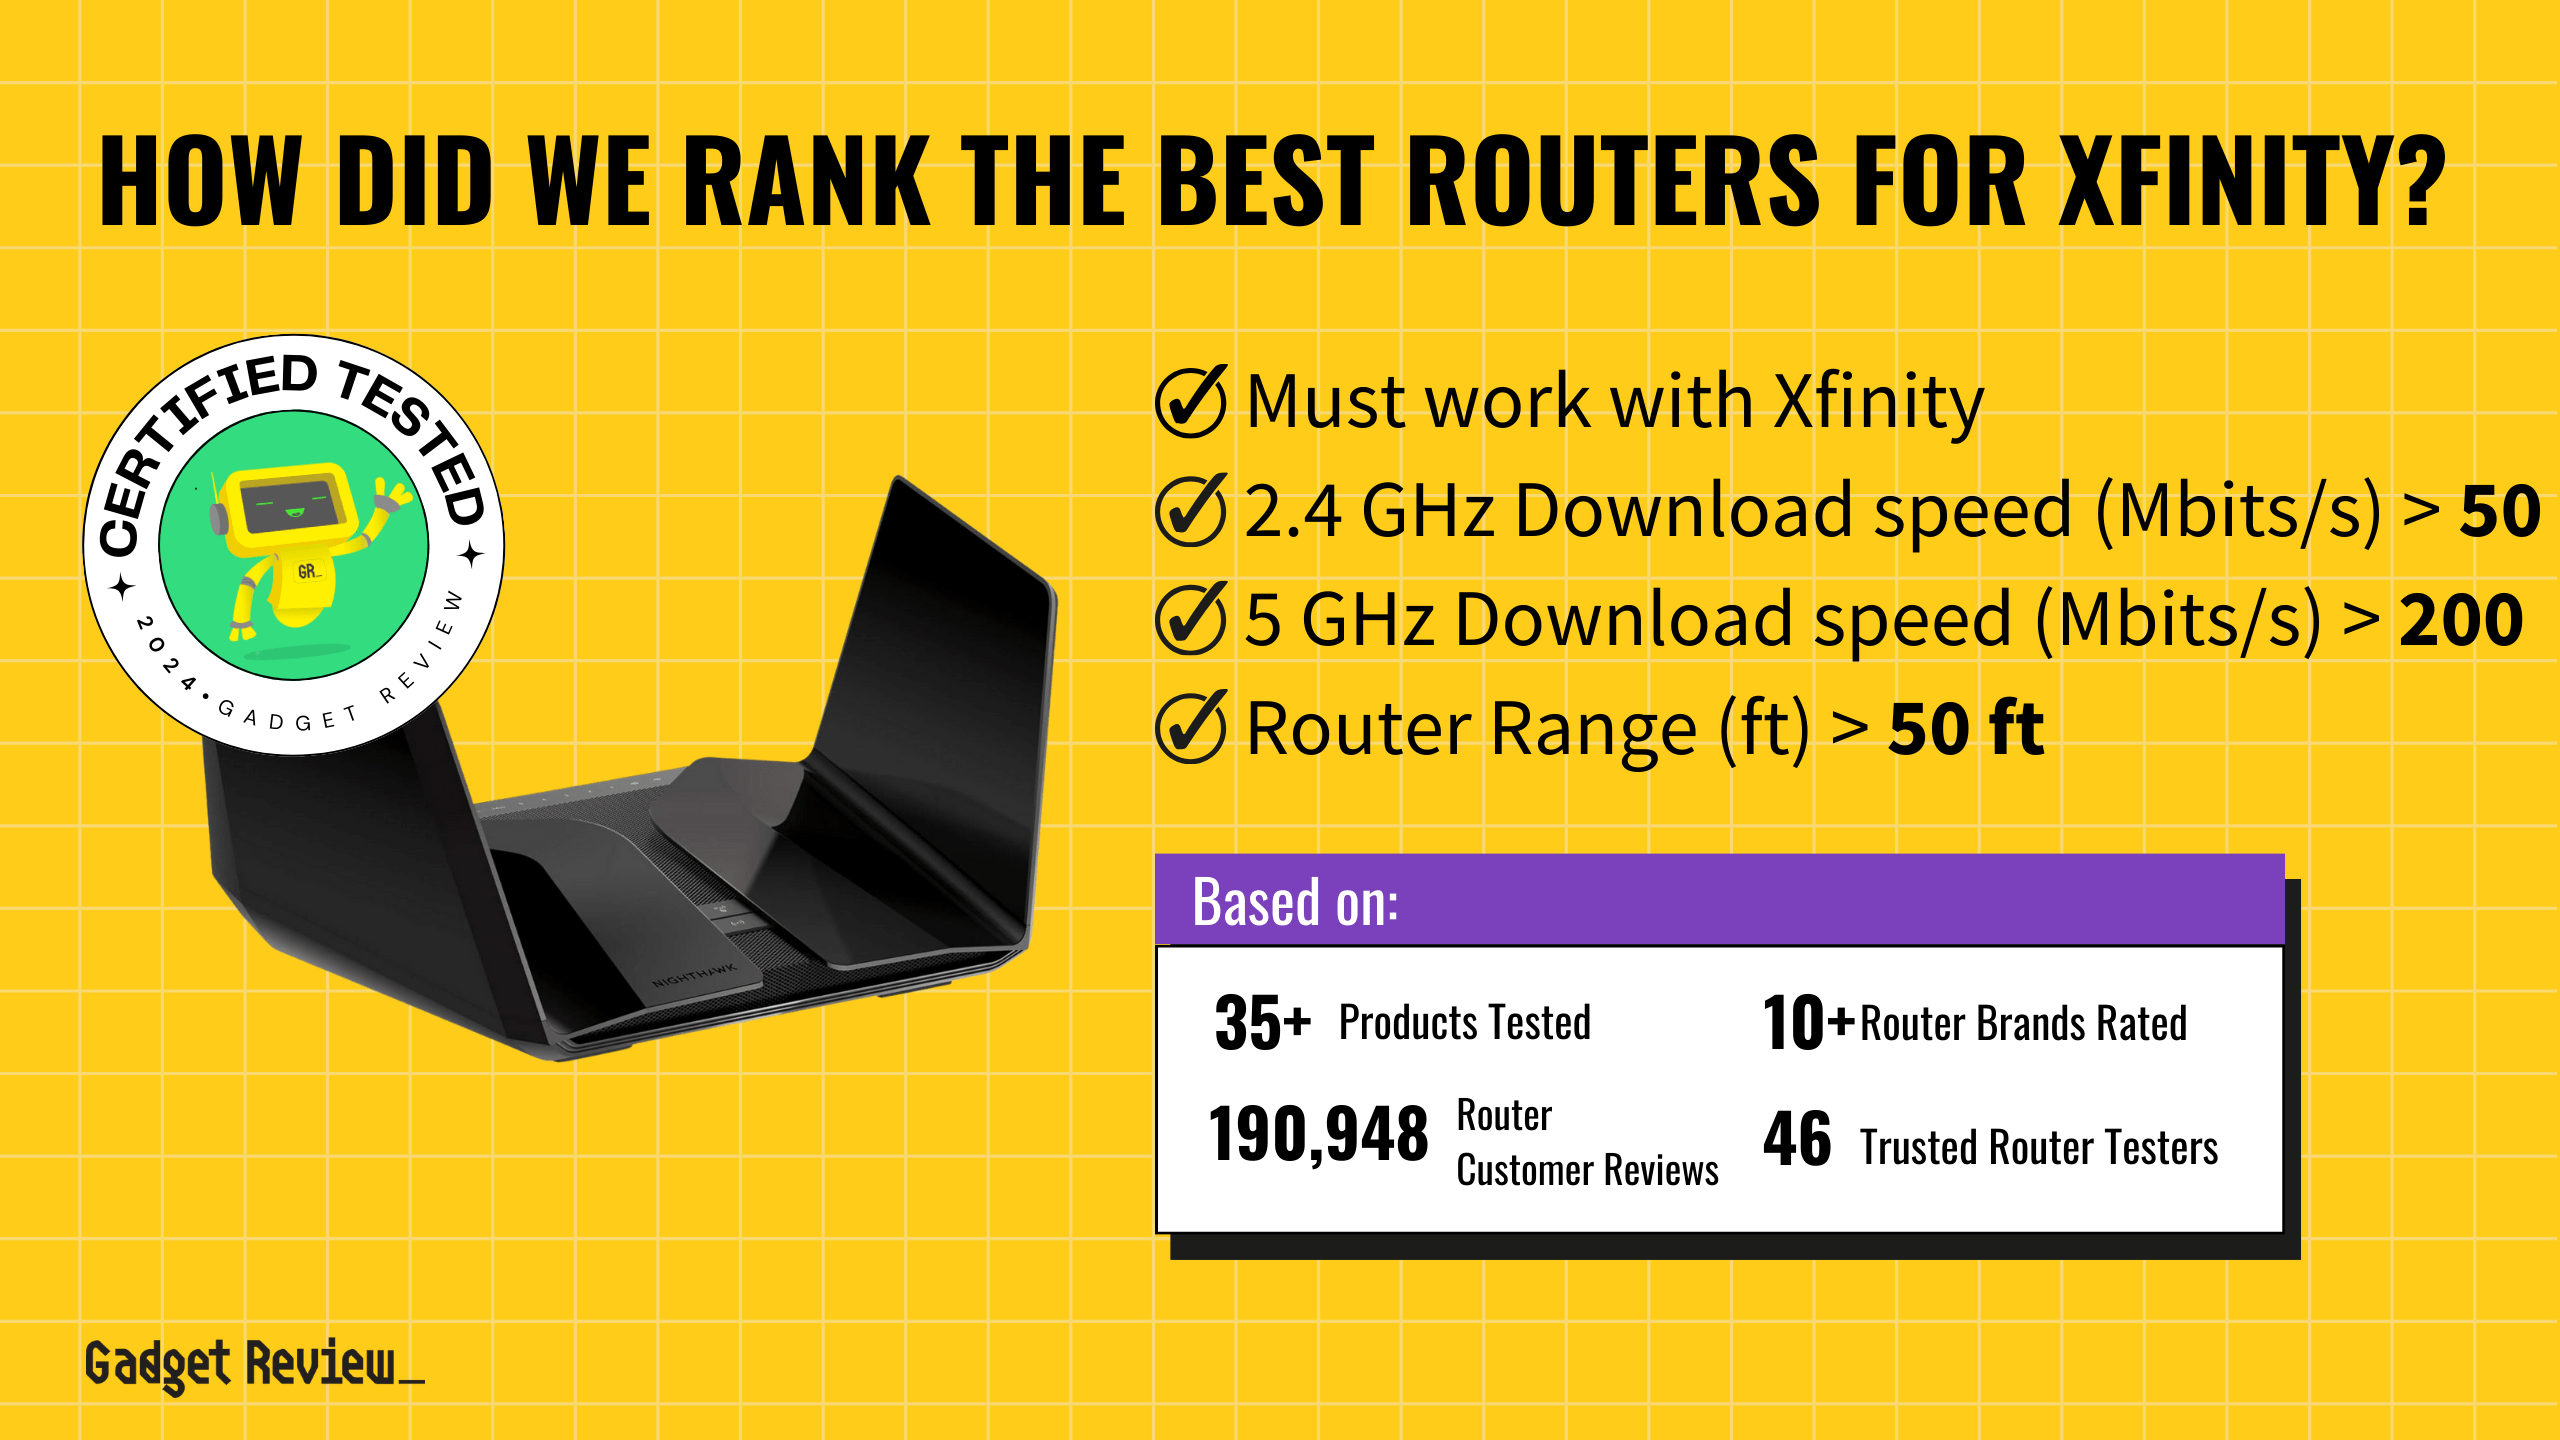 How We Ranked the 5 Best Routers for Xfinity